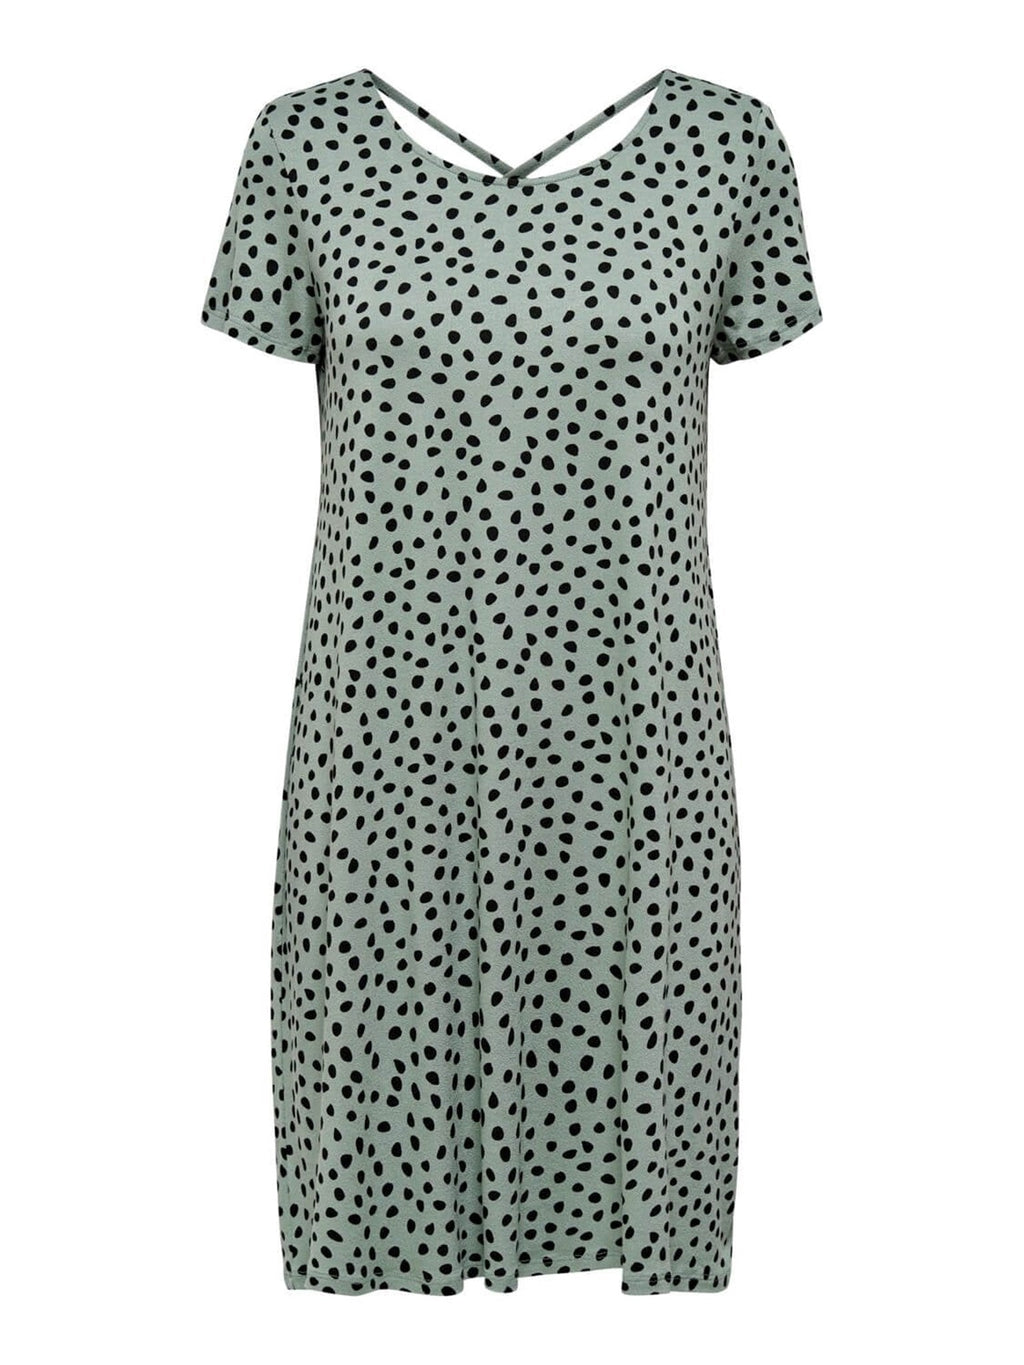 Loose dress with back details - Chinois Green Black Dotted